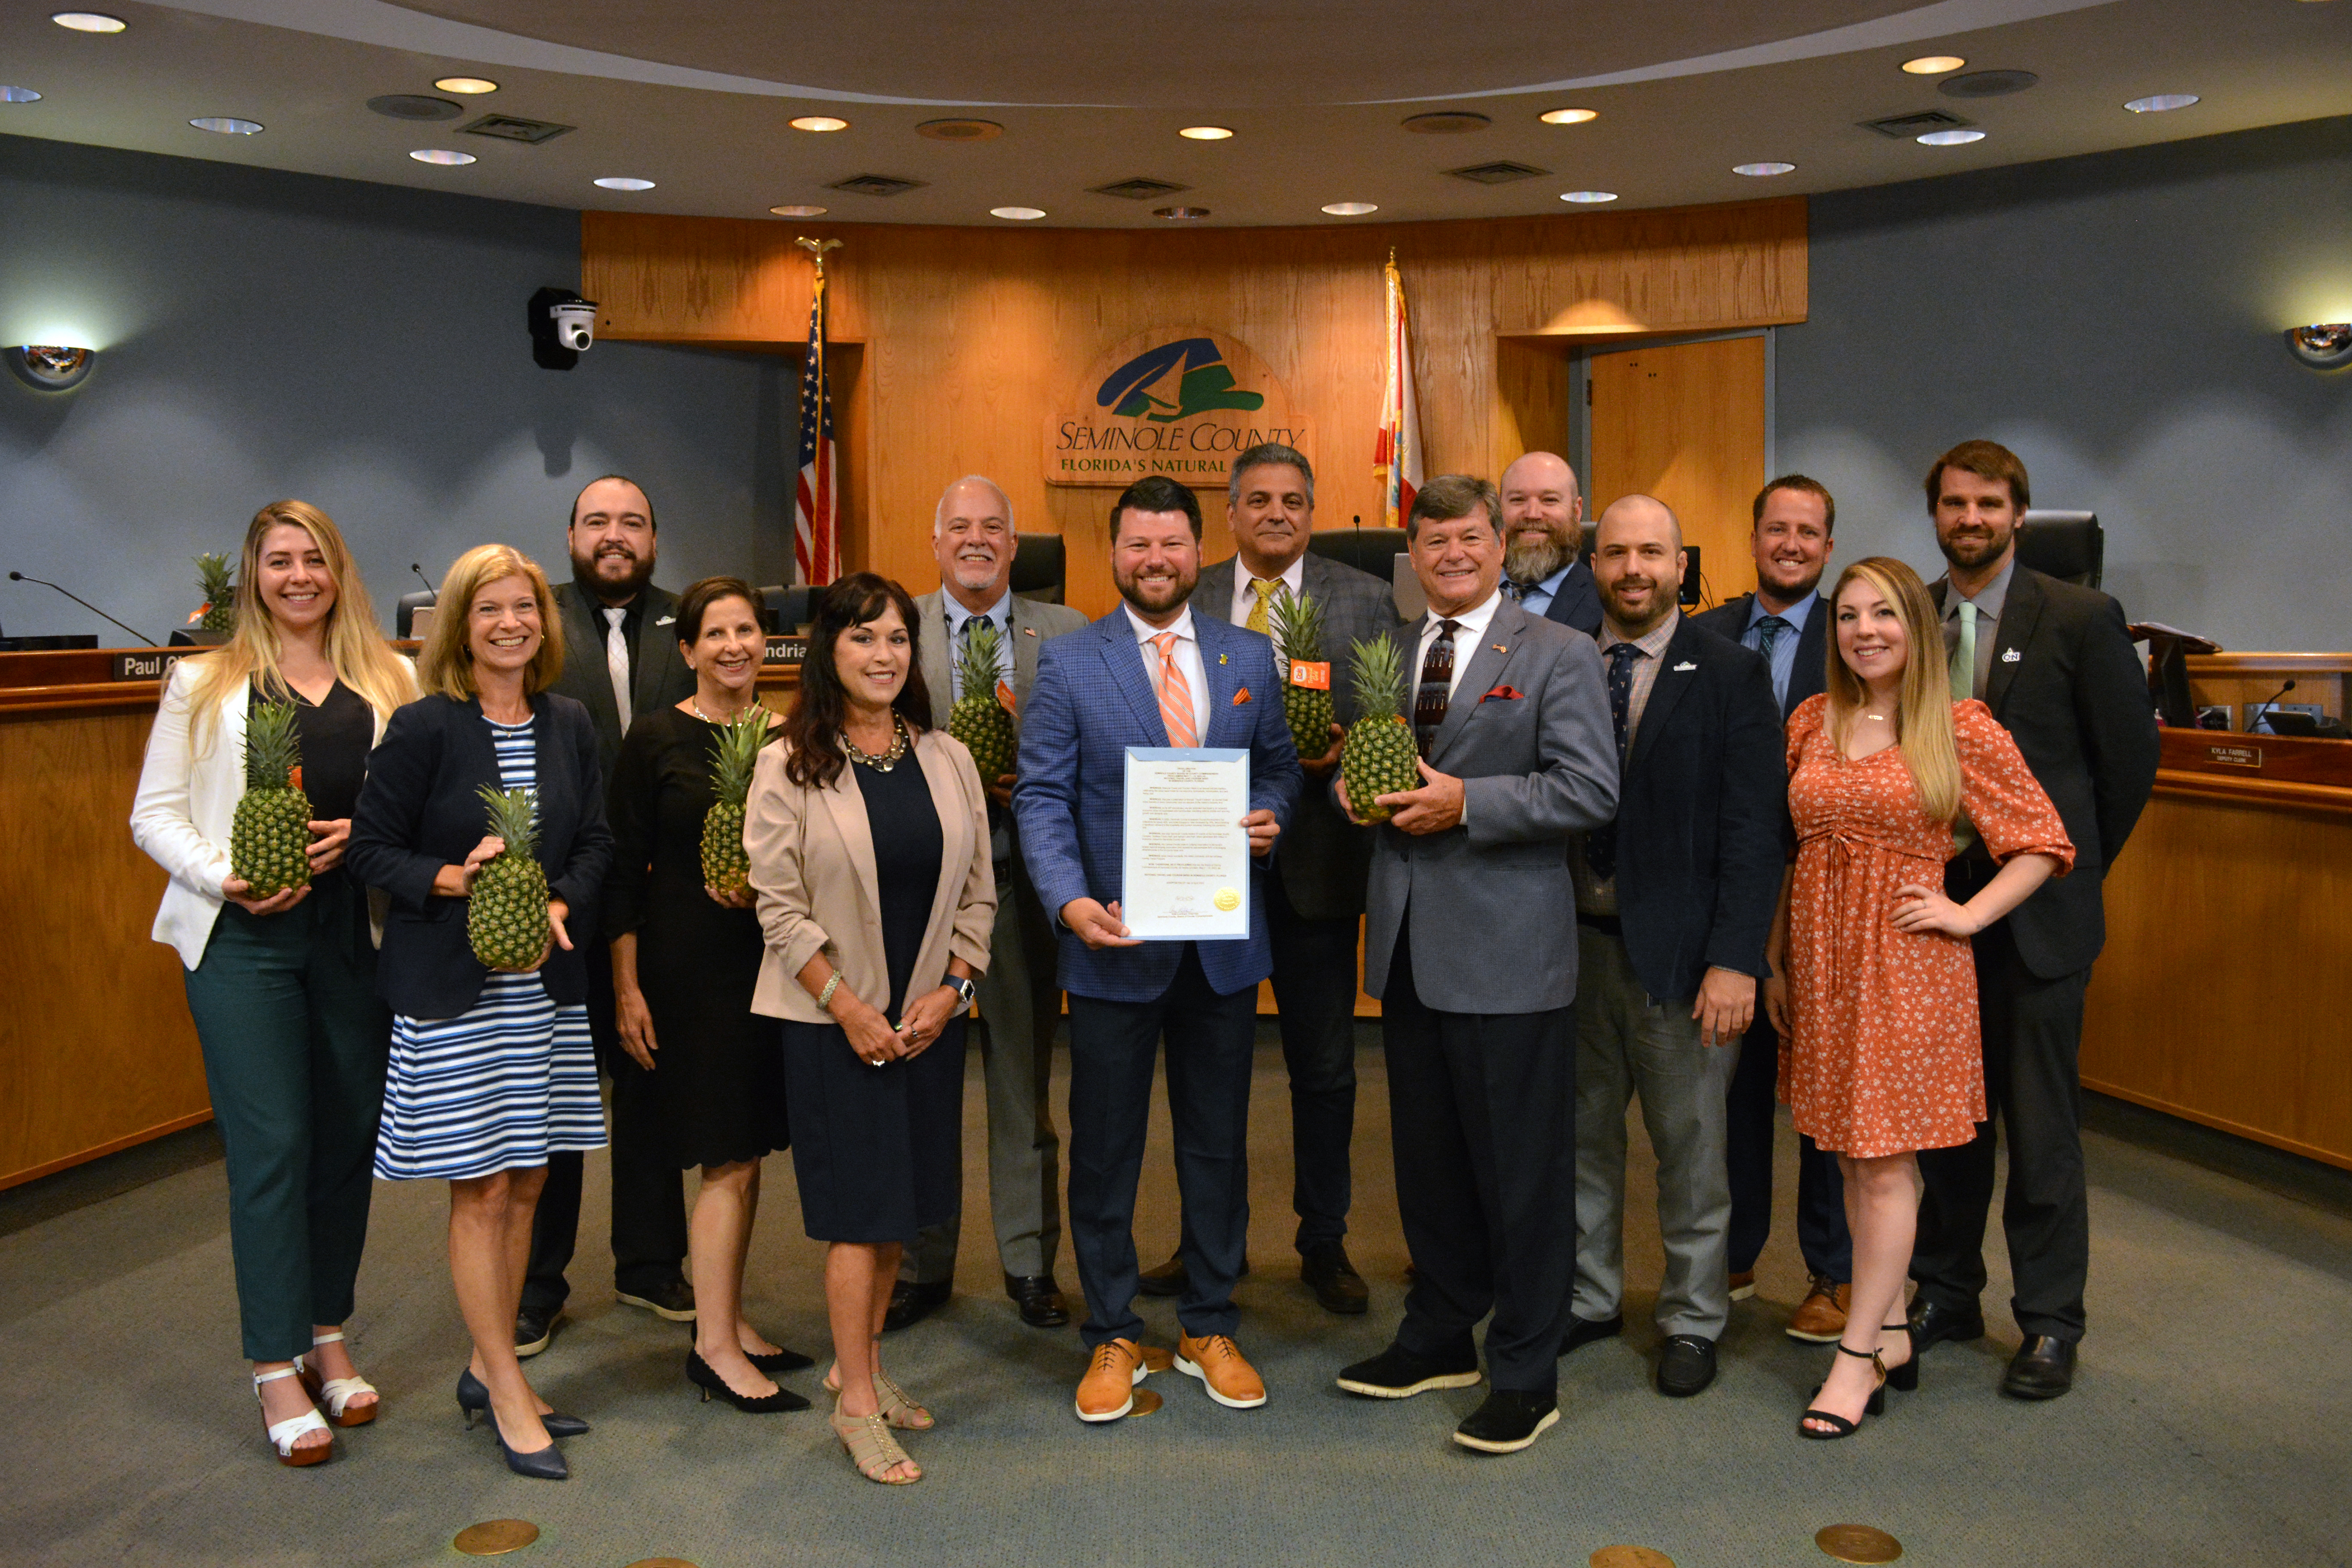 Proclamation — Proclaiming the Week of May 7 - 13, 2023 as National Travel and Tourism Week in Seminole County (Robert Agrusa, President/CEO, Central Florida Hotel Lodging Association)